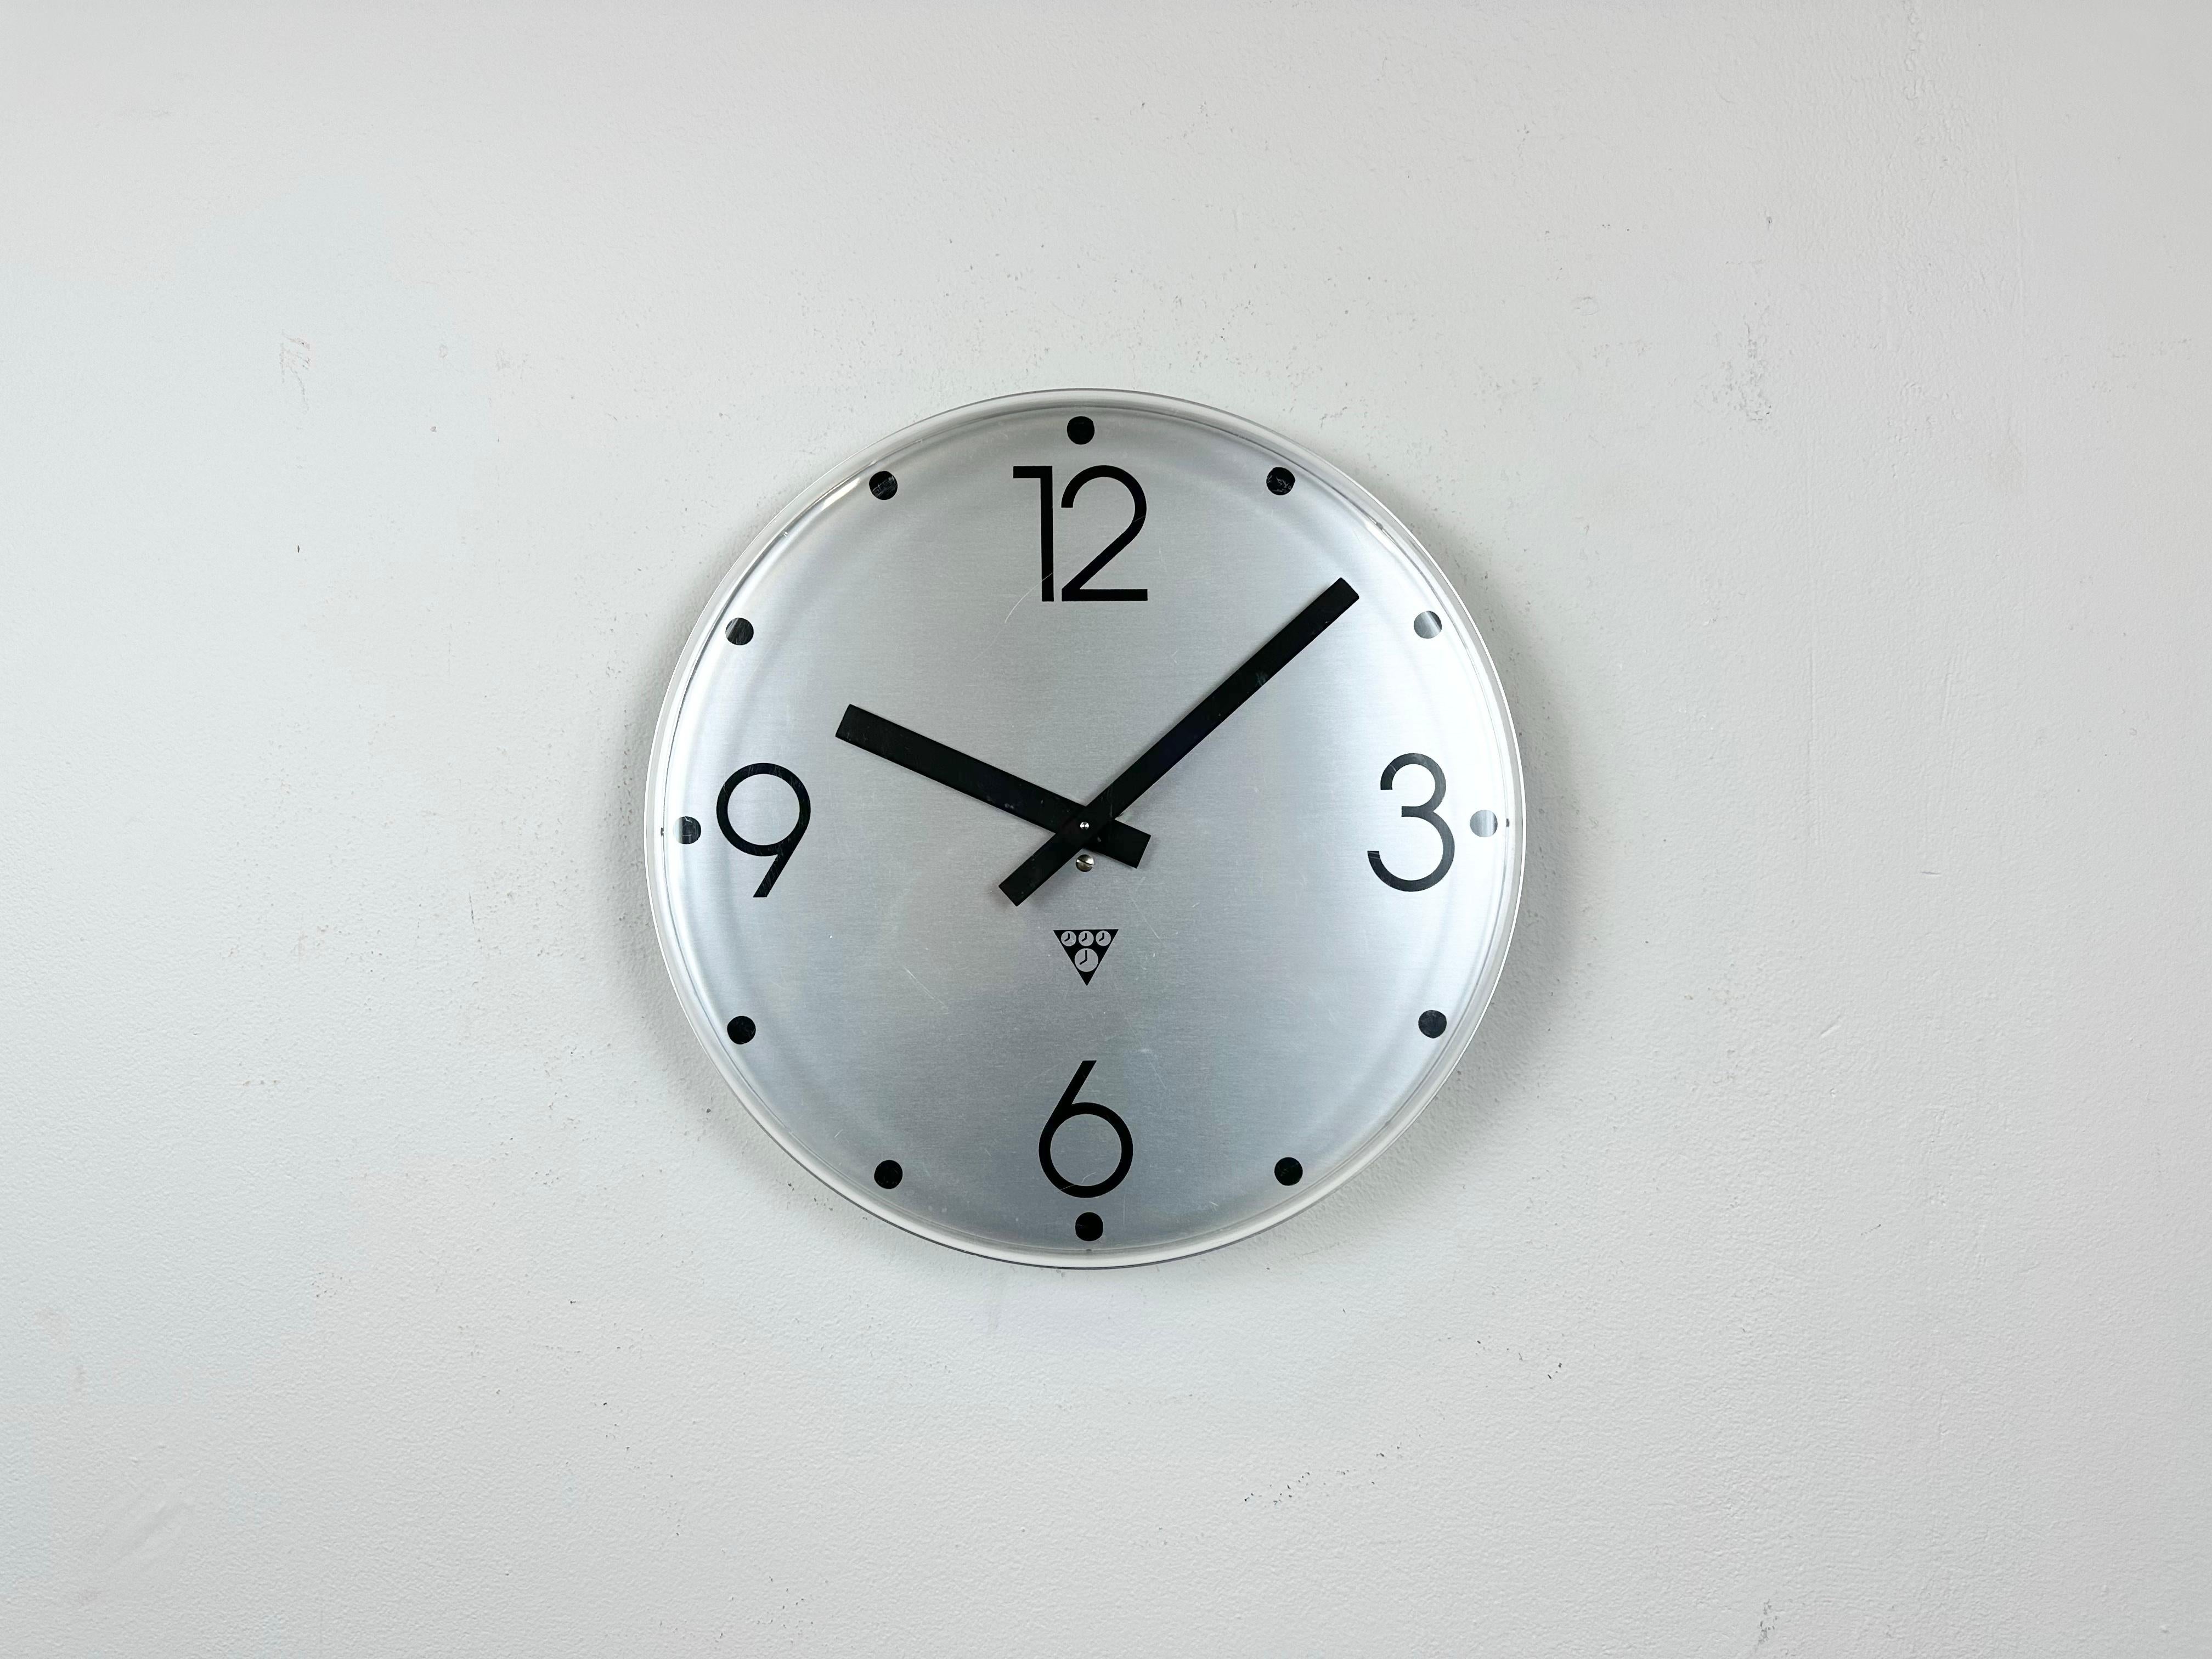 Industrial wall clock was produced by Pragotron in former Czechoslovakia during the 1980s. It features an aluminium dial and a curved plastic clear glass cover. The piece has been converted into a battery-powered clockwork and requires only one